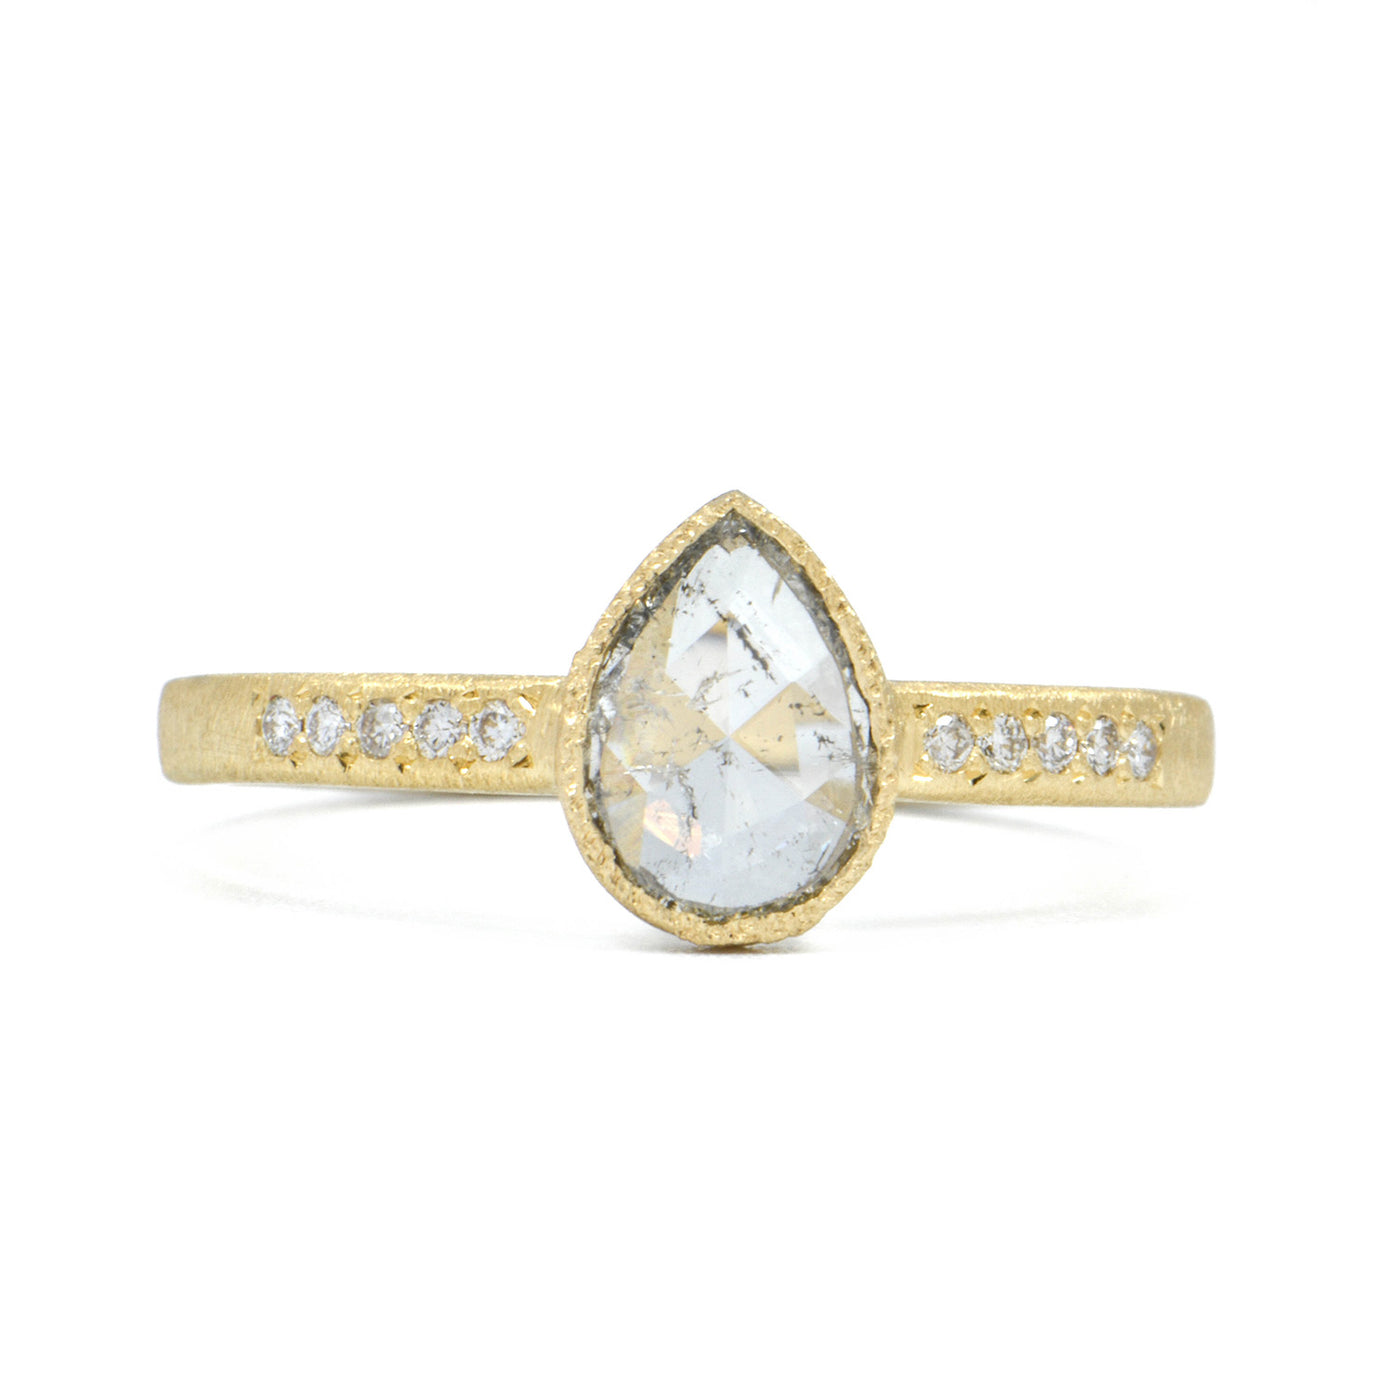 Colorless Pear Shaped Diamond Ring